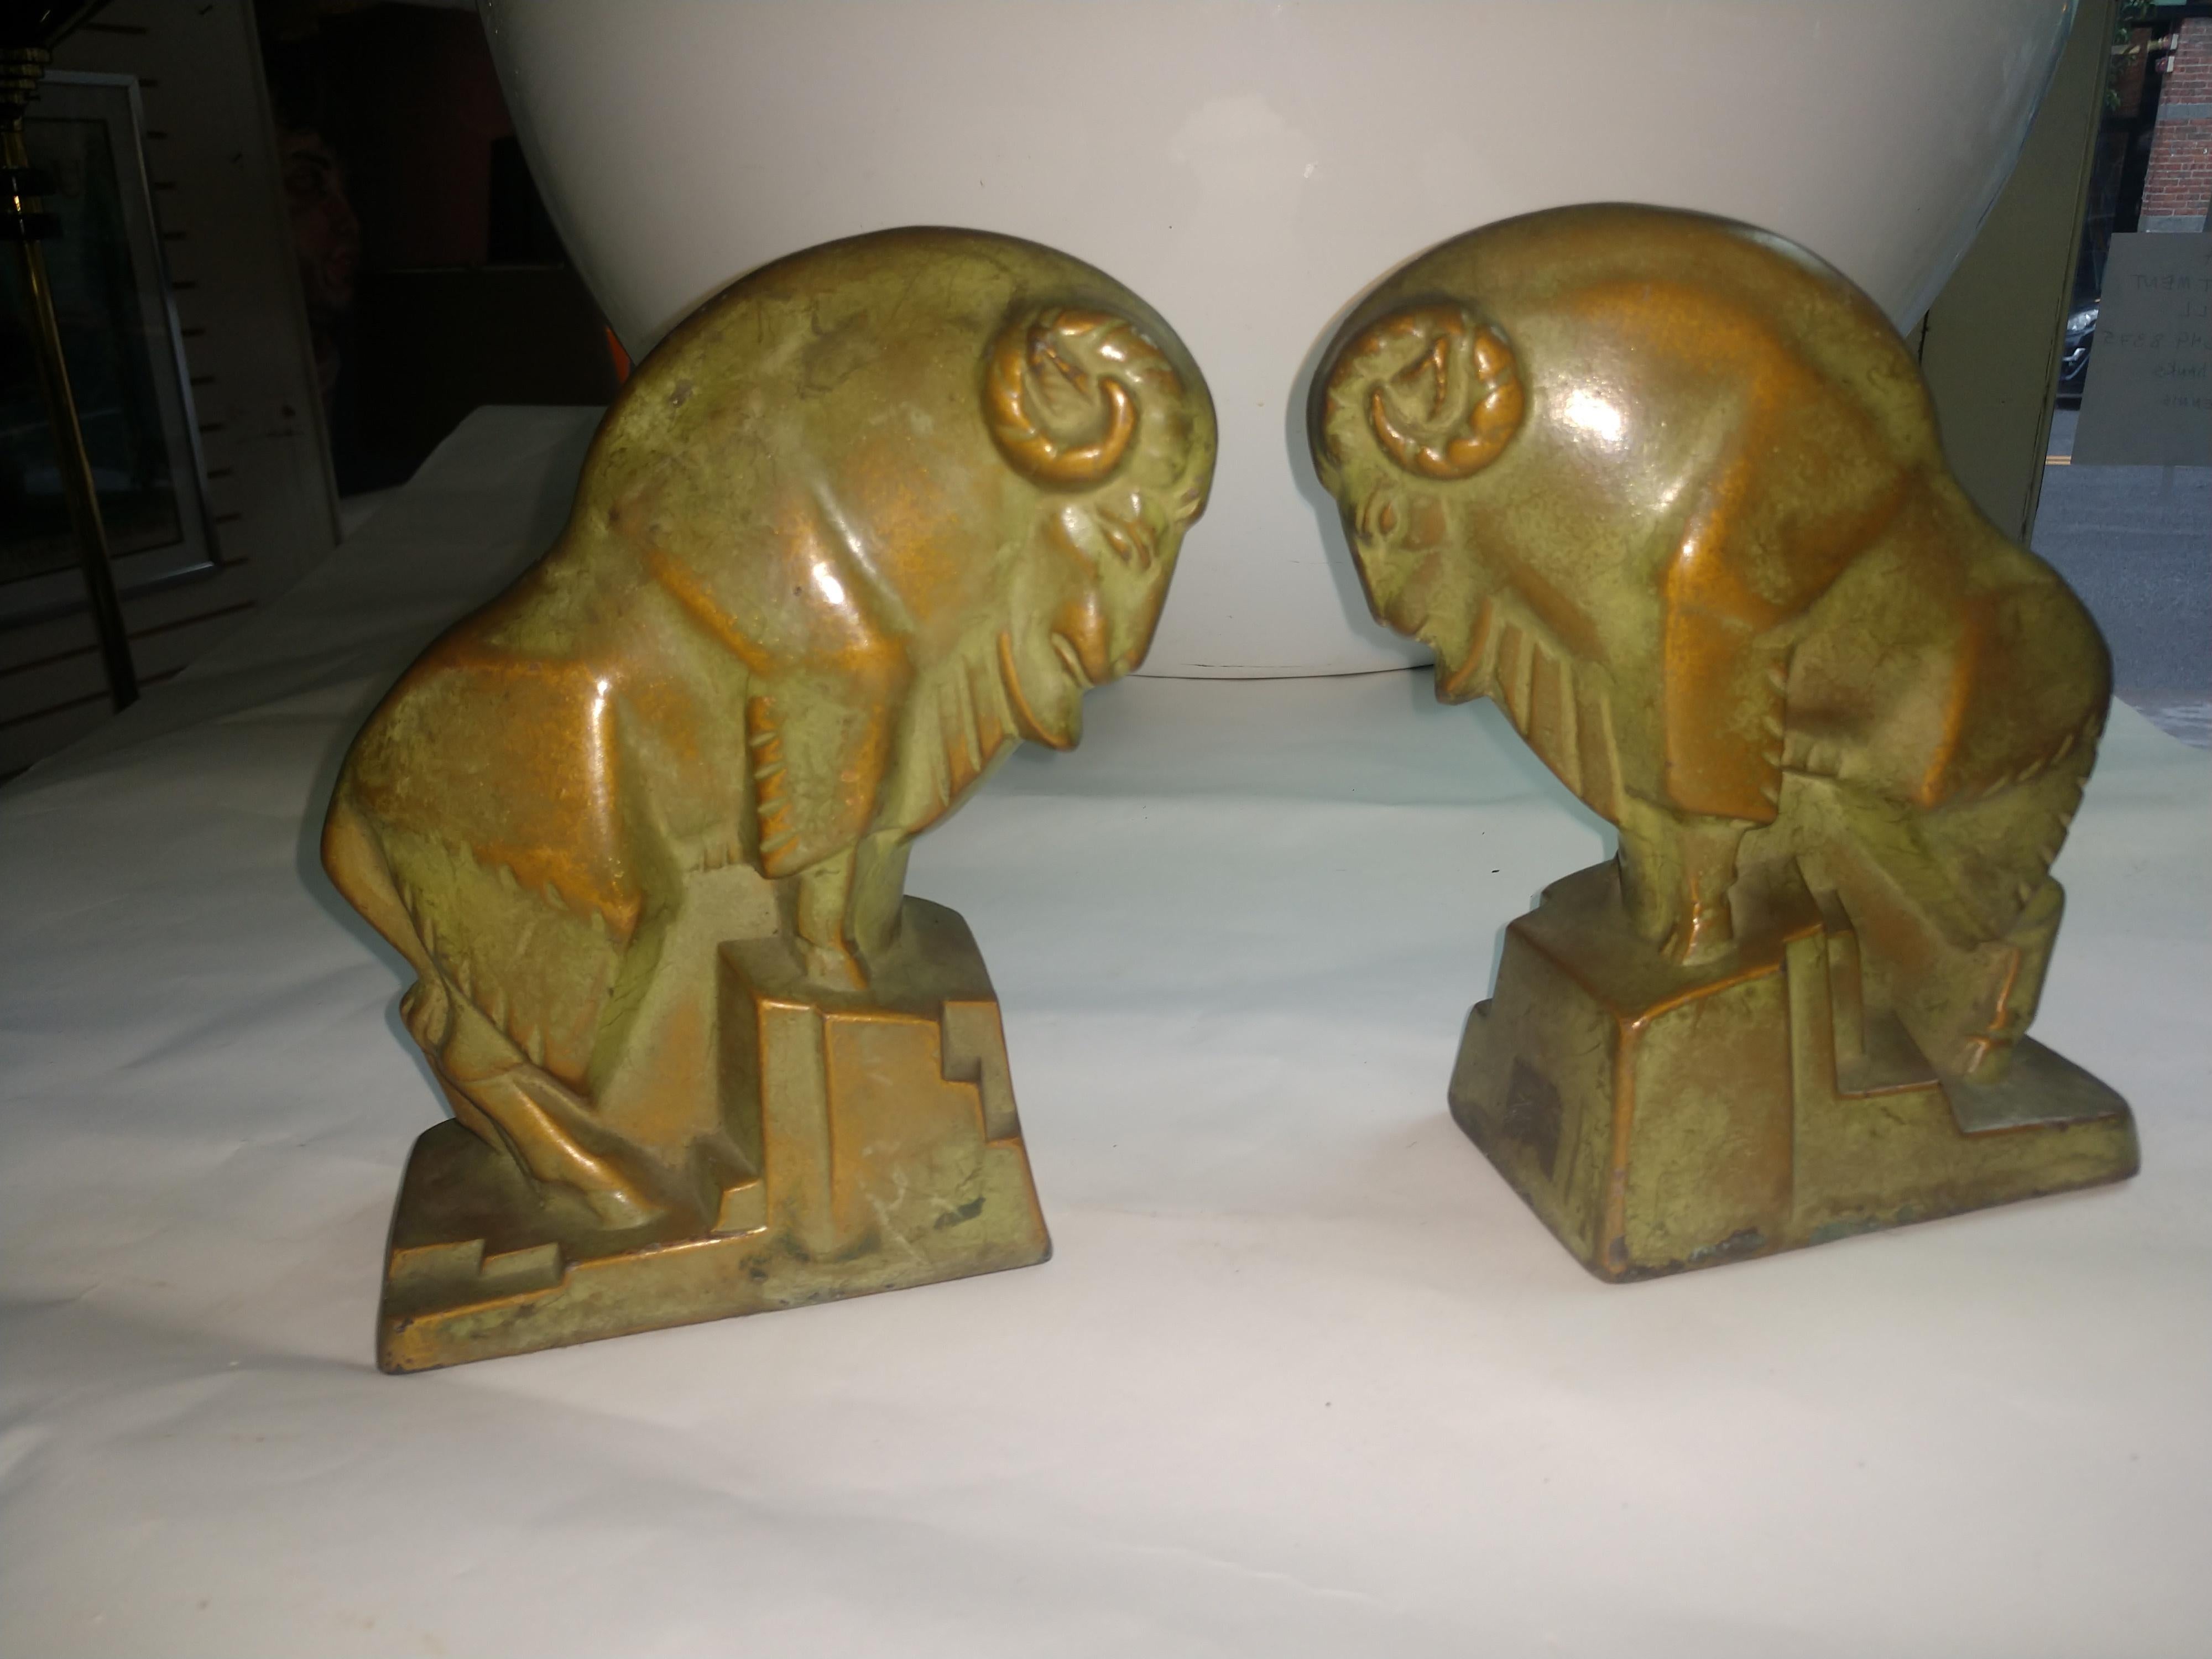 Fabulous bronzed with green patina Art Deco cubist style bookends. Signed McClelland & Barclays on back bottom edge. In excellent vintage condition with minimal wear.